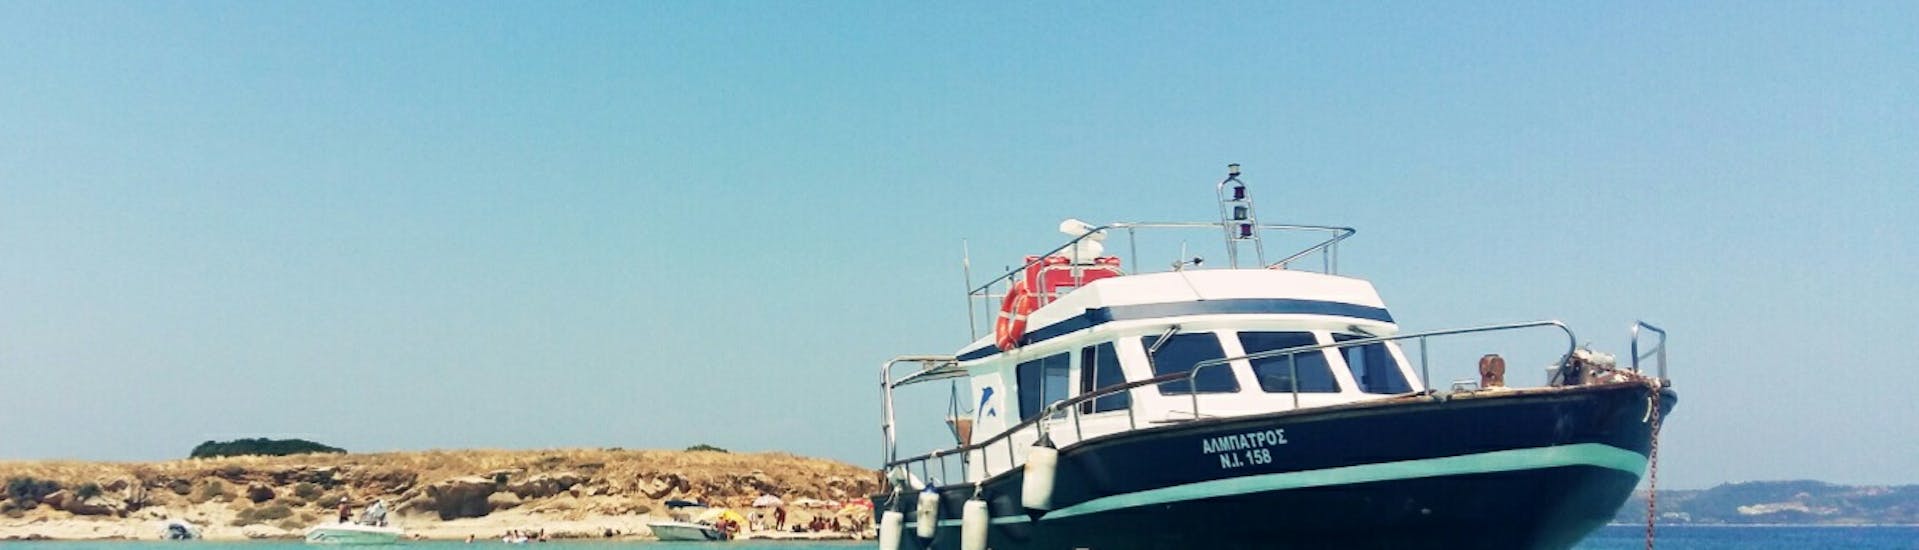 Boat of the Private Fishing Trip around Halkidiki with Snorkeling with Albatros Cruises Halkidiki.